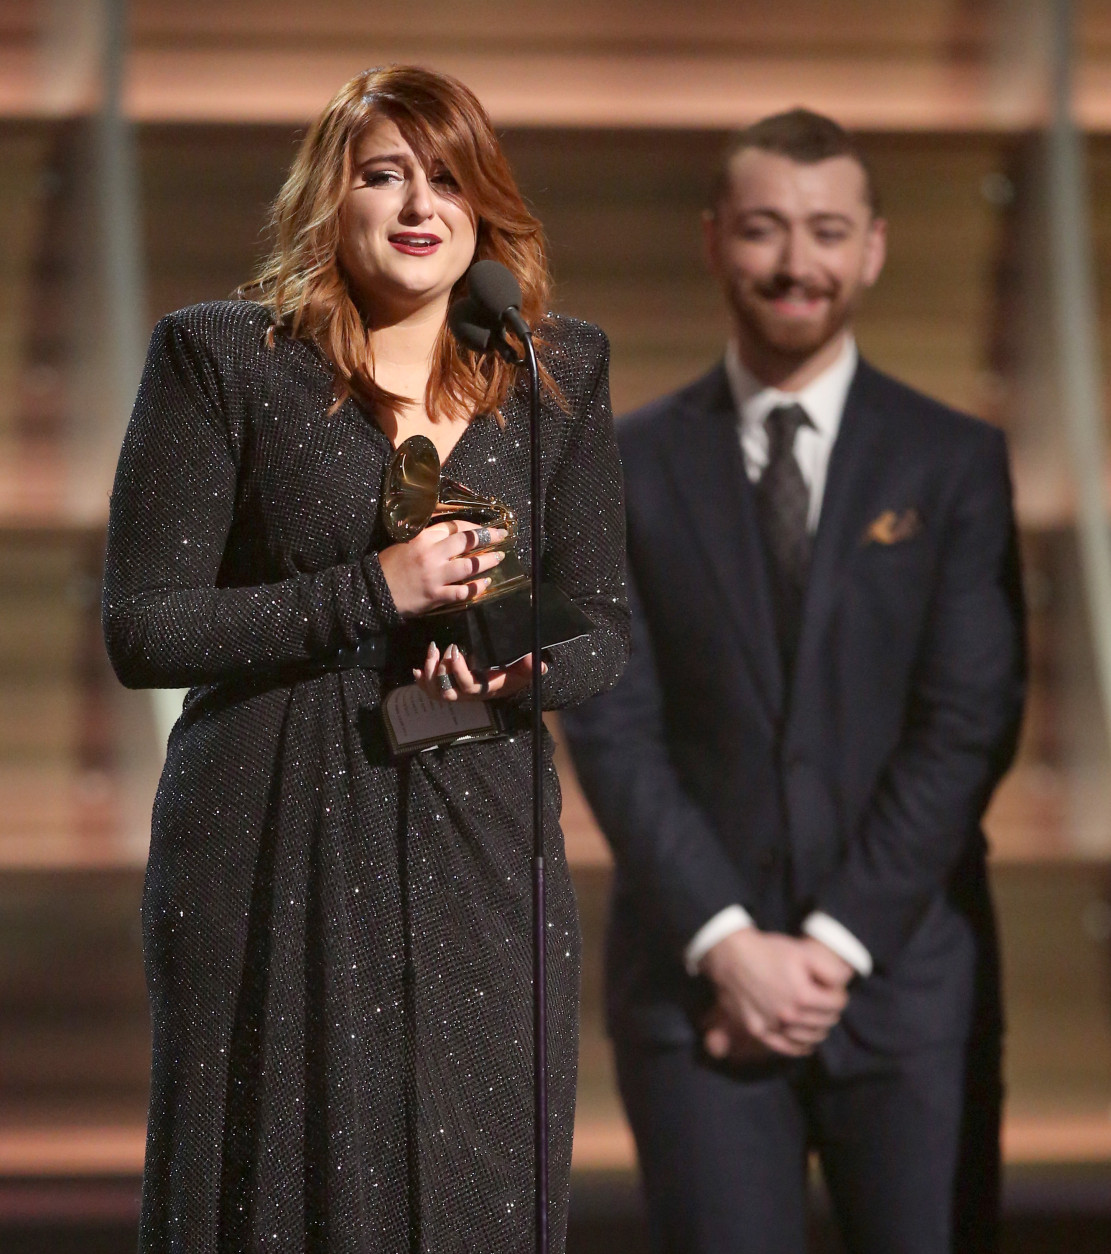 Meghan Trainor accepts the award for best new artist at the 58th annual Grammy Awards on Monday, Feb. 15, 2016, in Los Angeles. (Photo by Matt Sayles/Invision/AP)